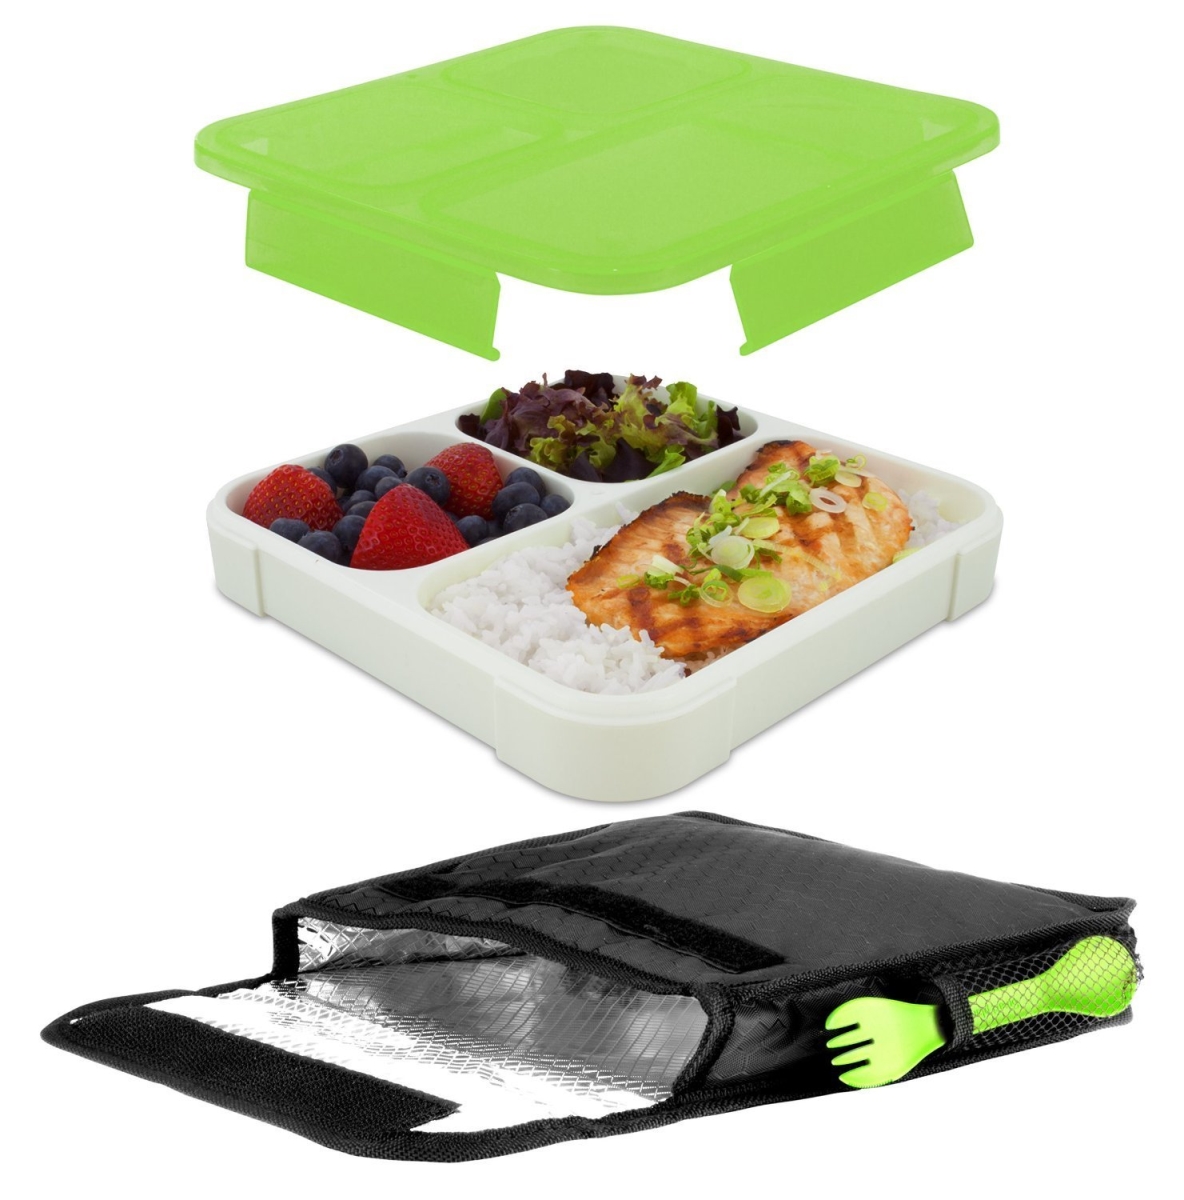 Ultrathin Lunchbook With Insulated Carrying Case - Green